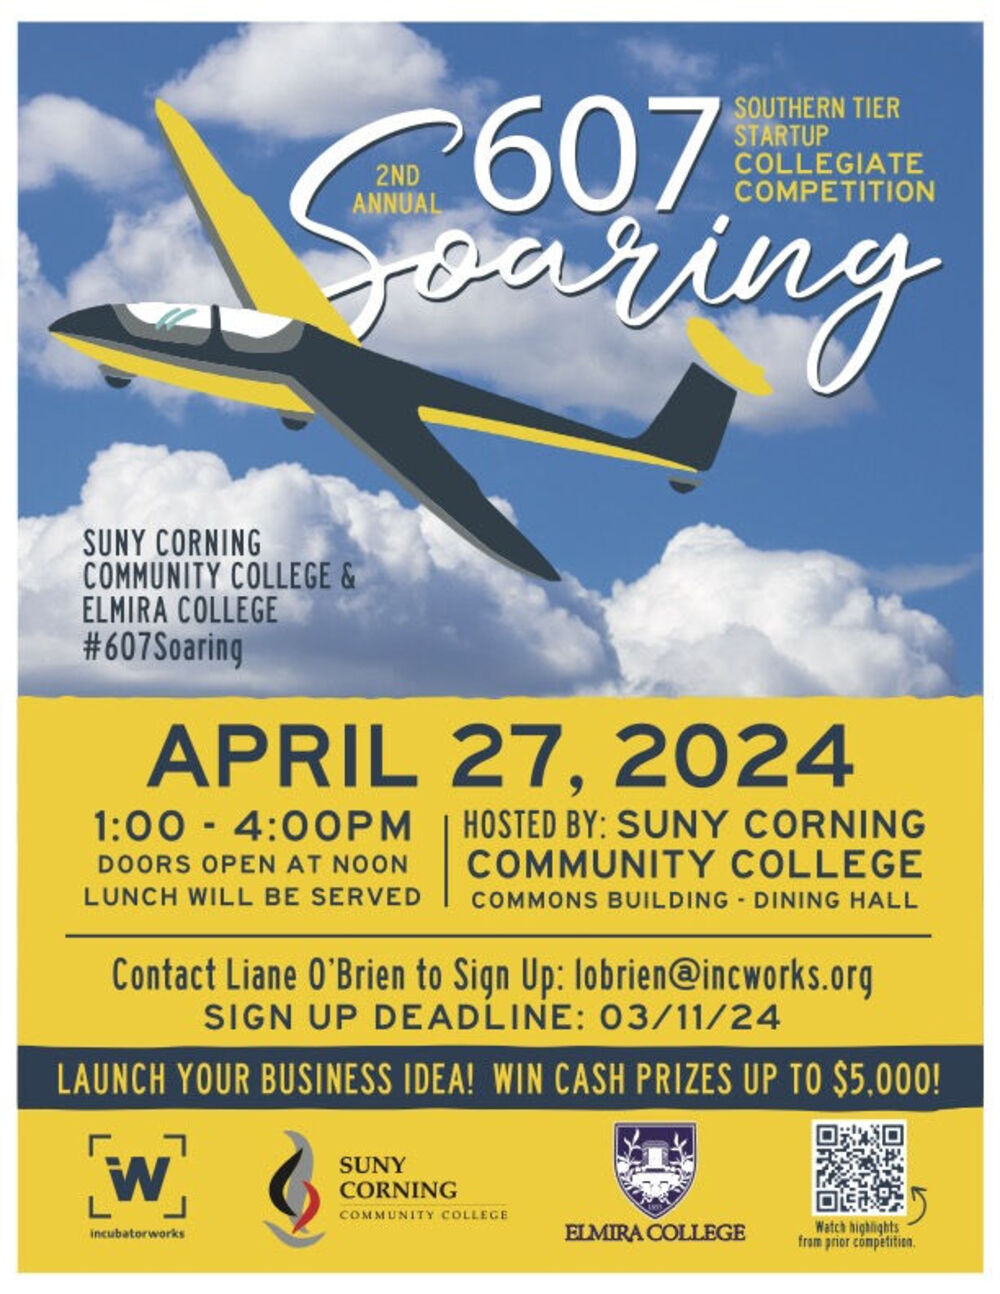 607-soaring-southern-tier-startup-collegiate-competition